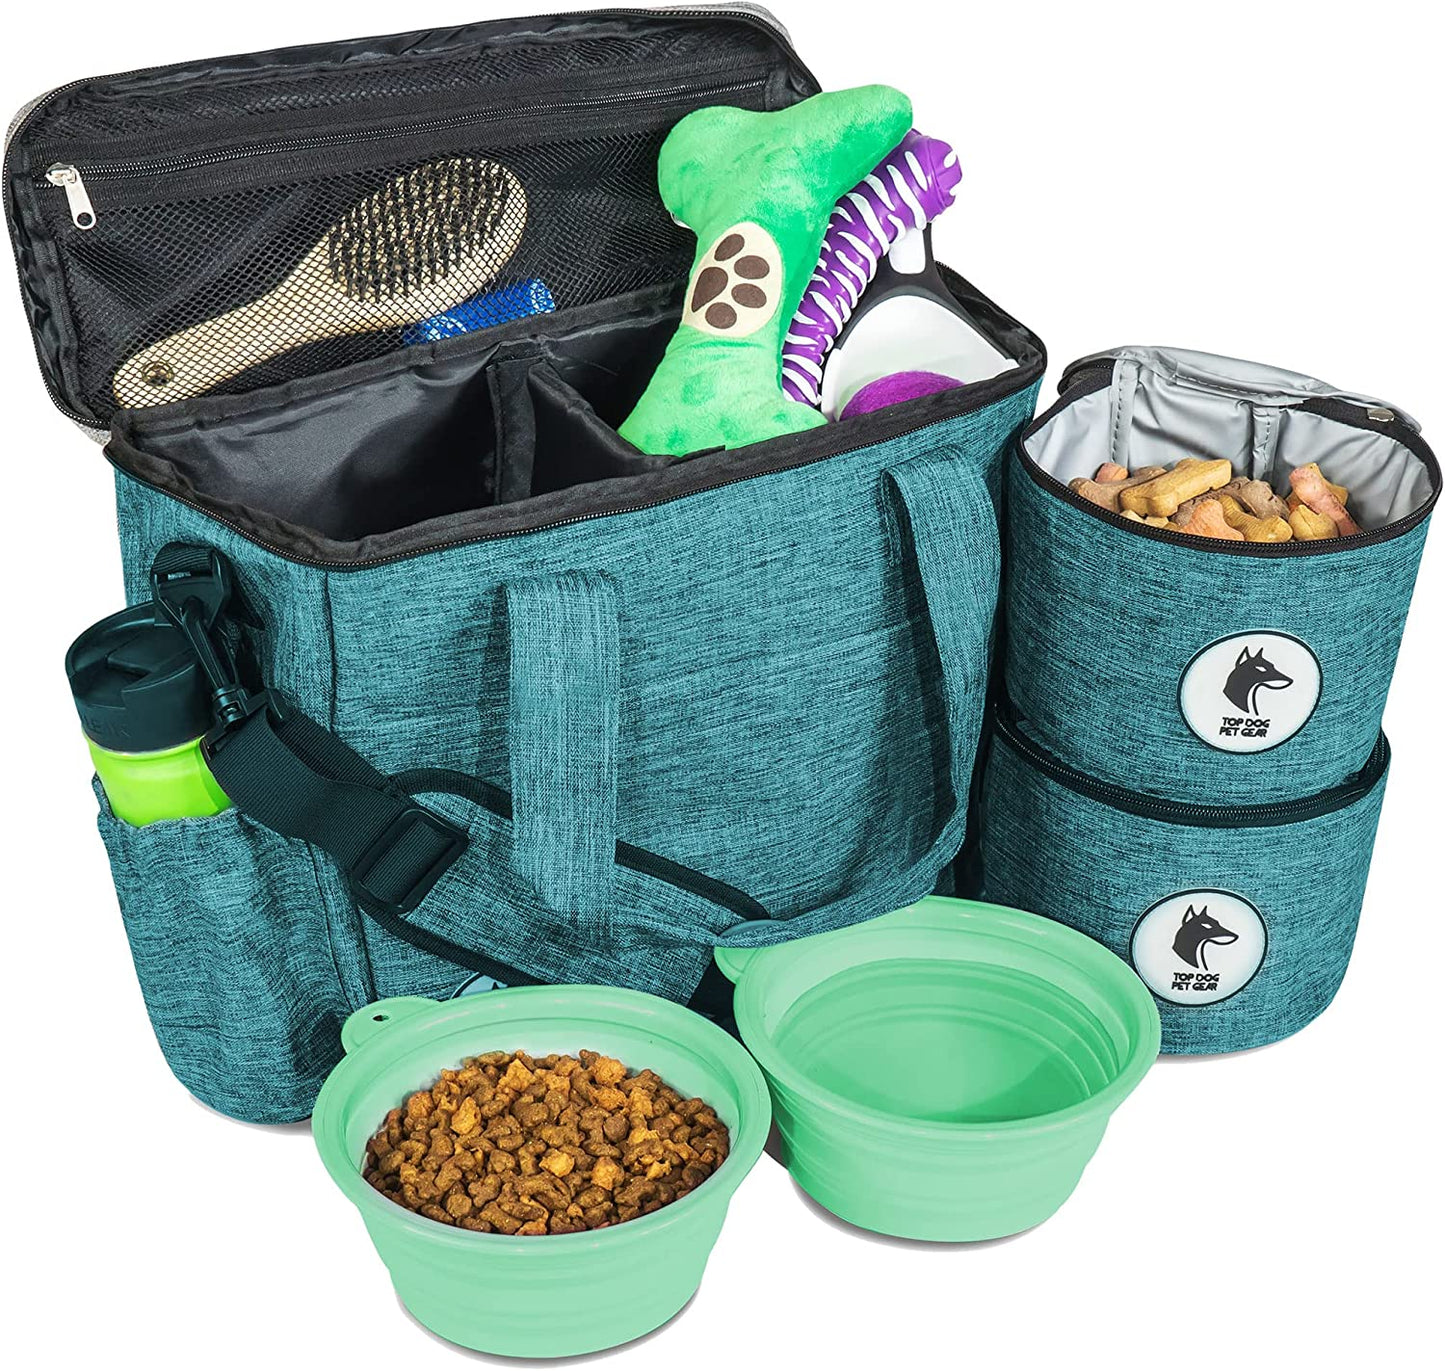 Grey Dog Travel Bag for Supplies - Includes Travel Bag, Travel Dog Bowls, Food Storage - Airline Approved Dog Bags for Traveling - Dog Travel Accessories for Camping, Beach